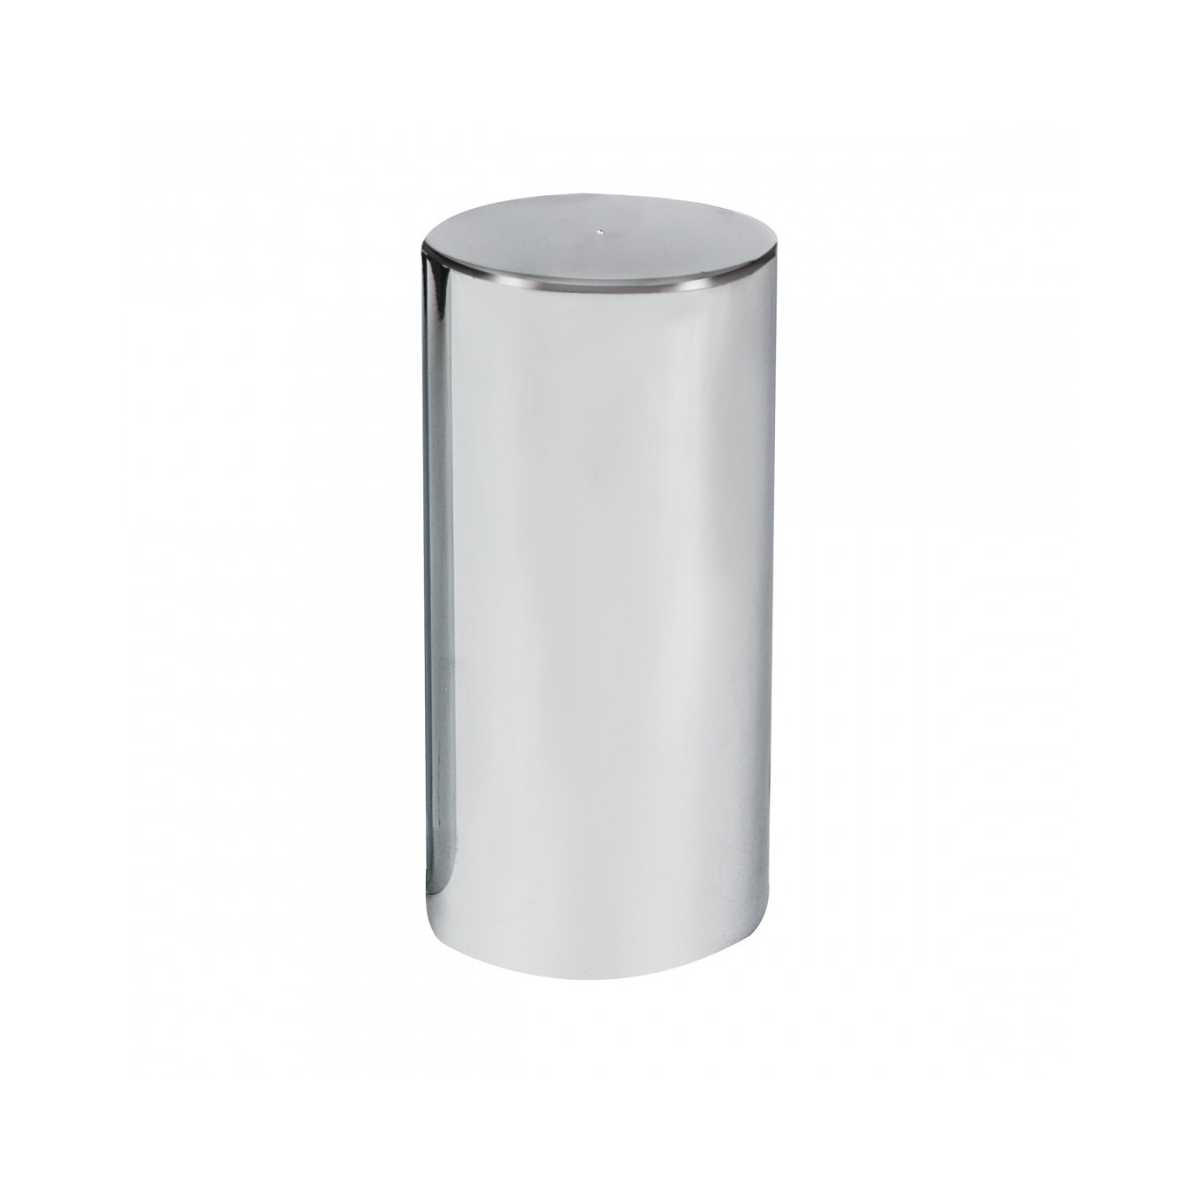 33 mm x 4 1/4 Inch Chrome Plastic Tall Cylinder Nut Cover - Thread-On - 10 Pack